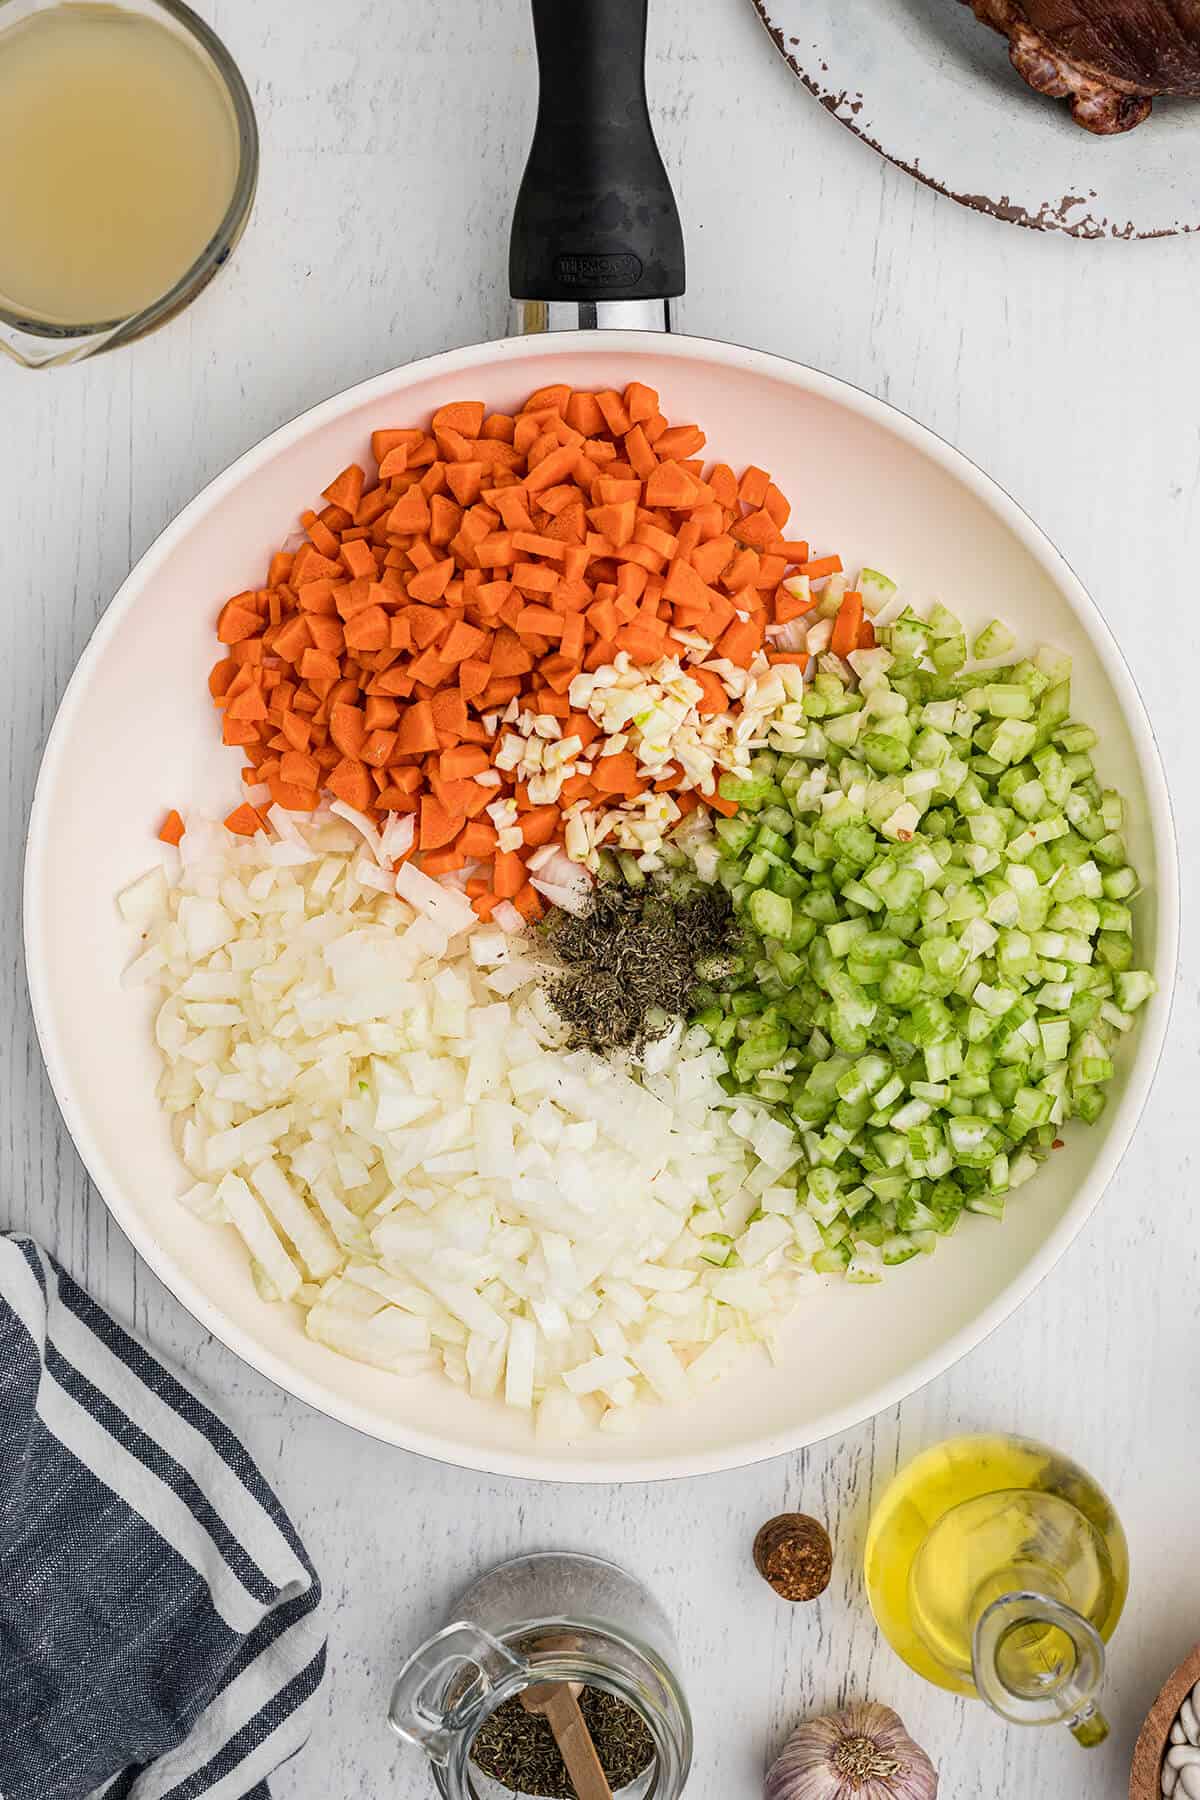 Diced vegetables and herbs in a skillet.